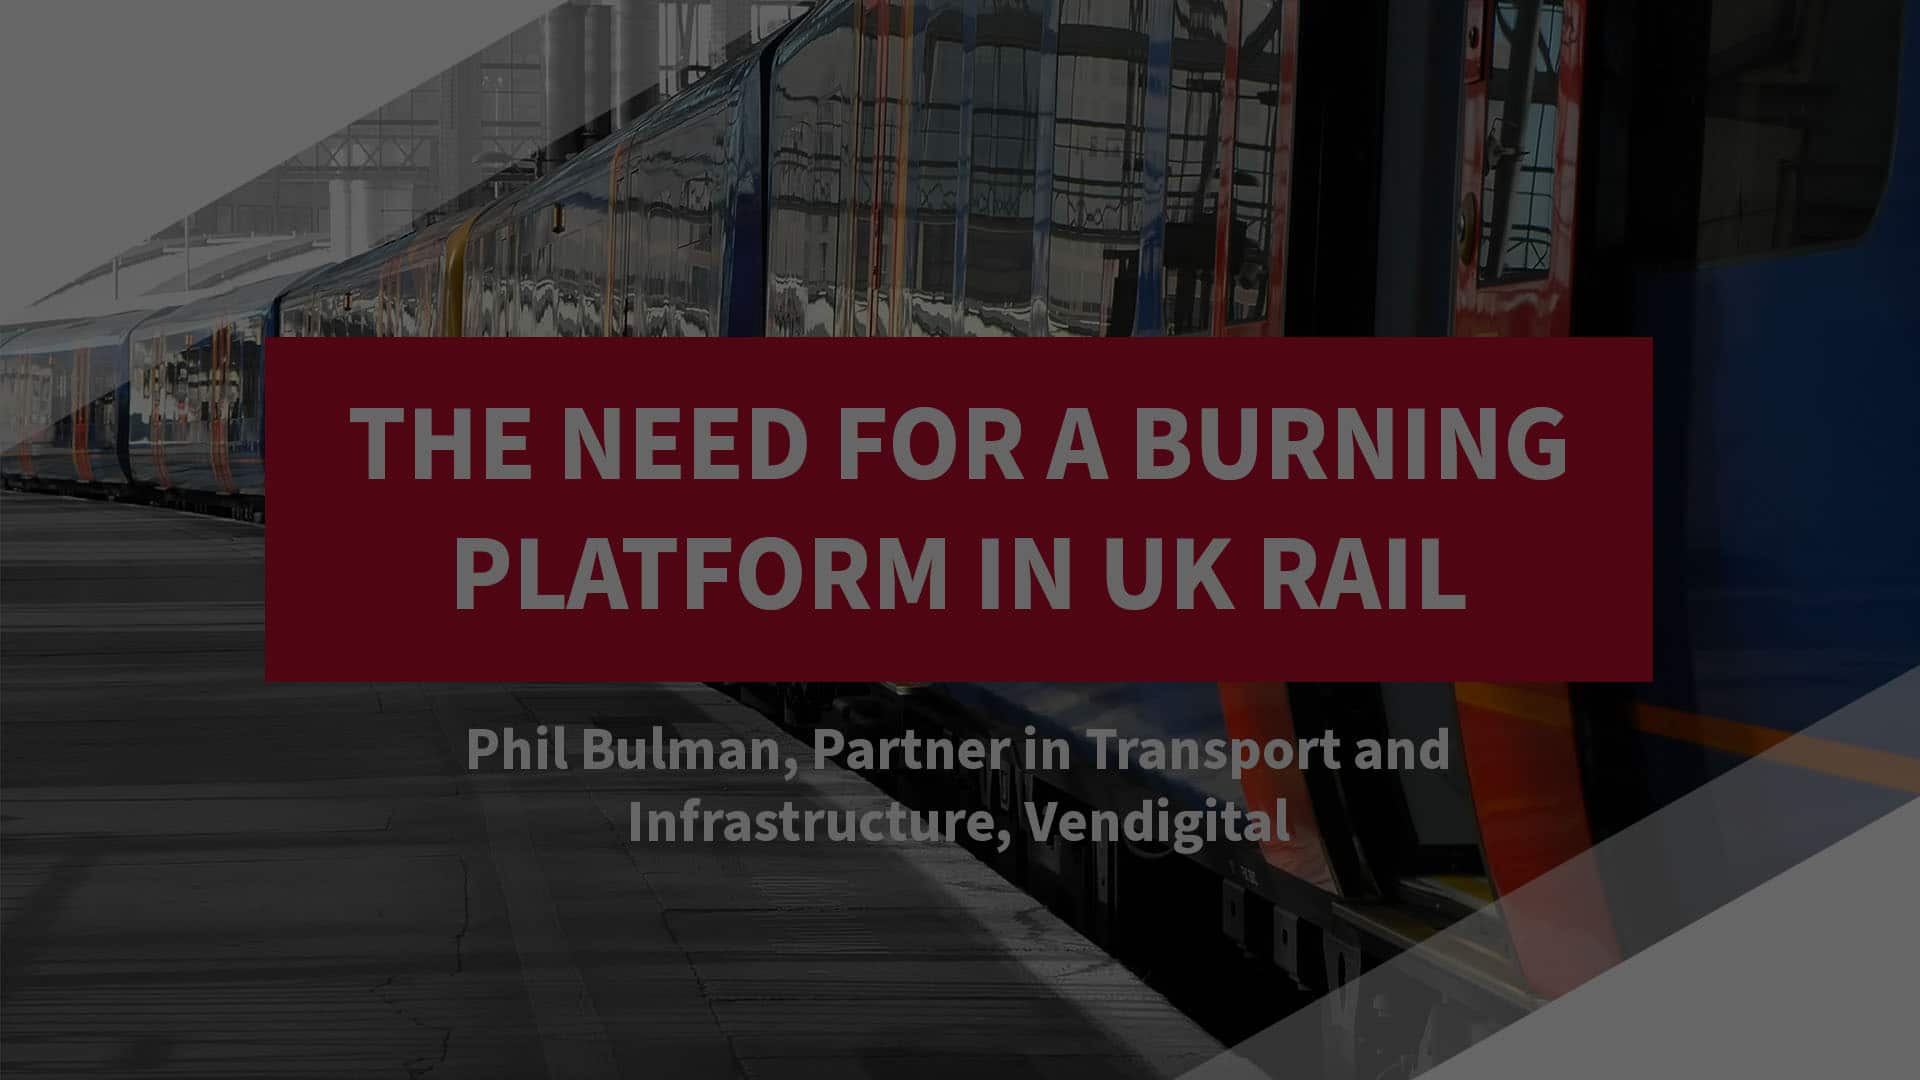 The need for a burning platform in UK rail video